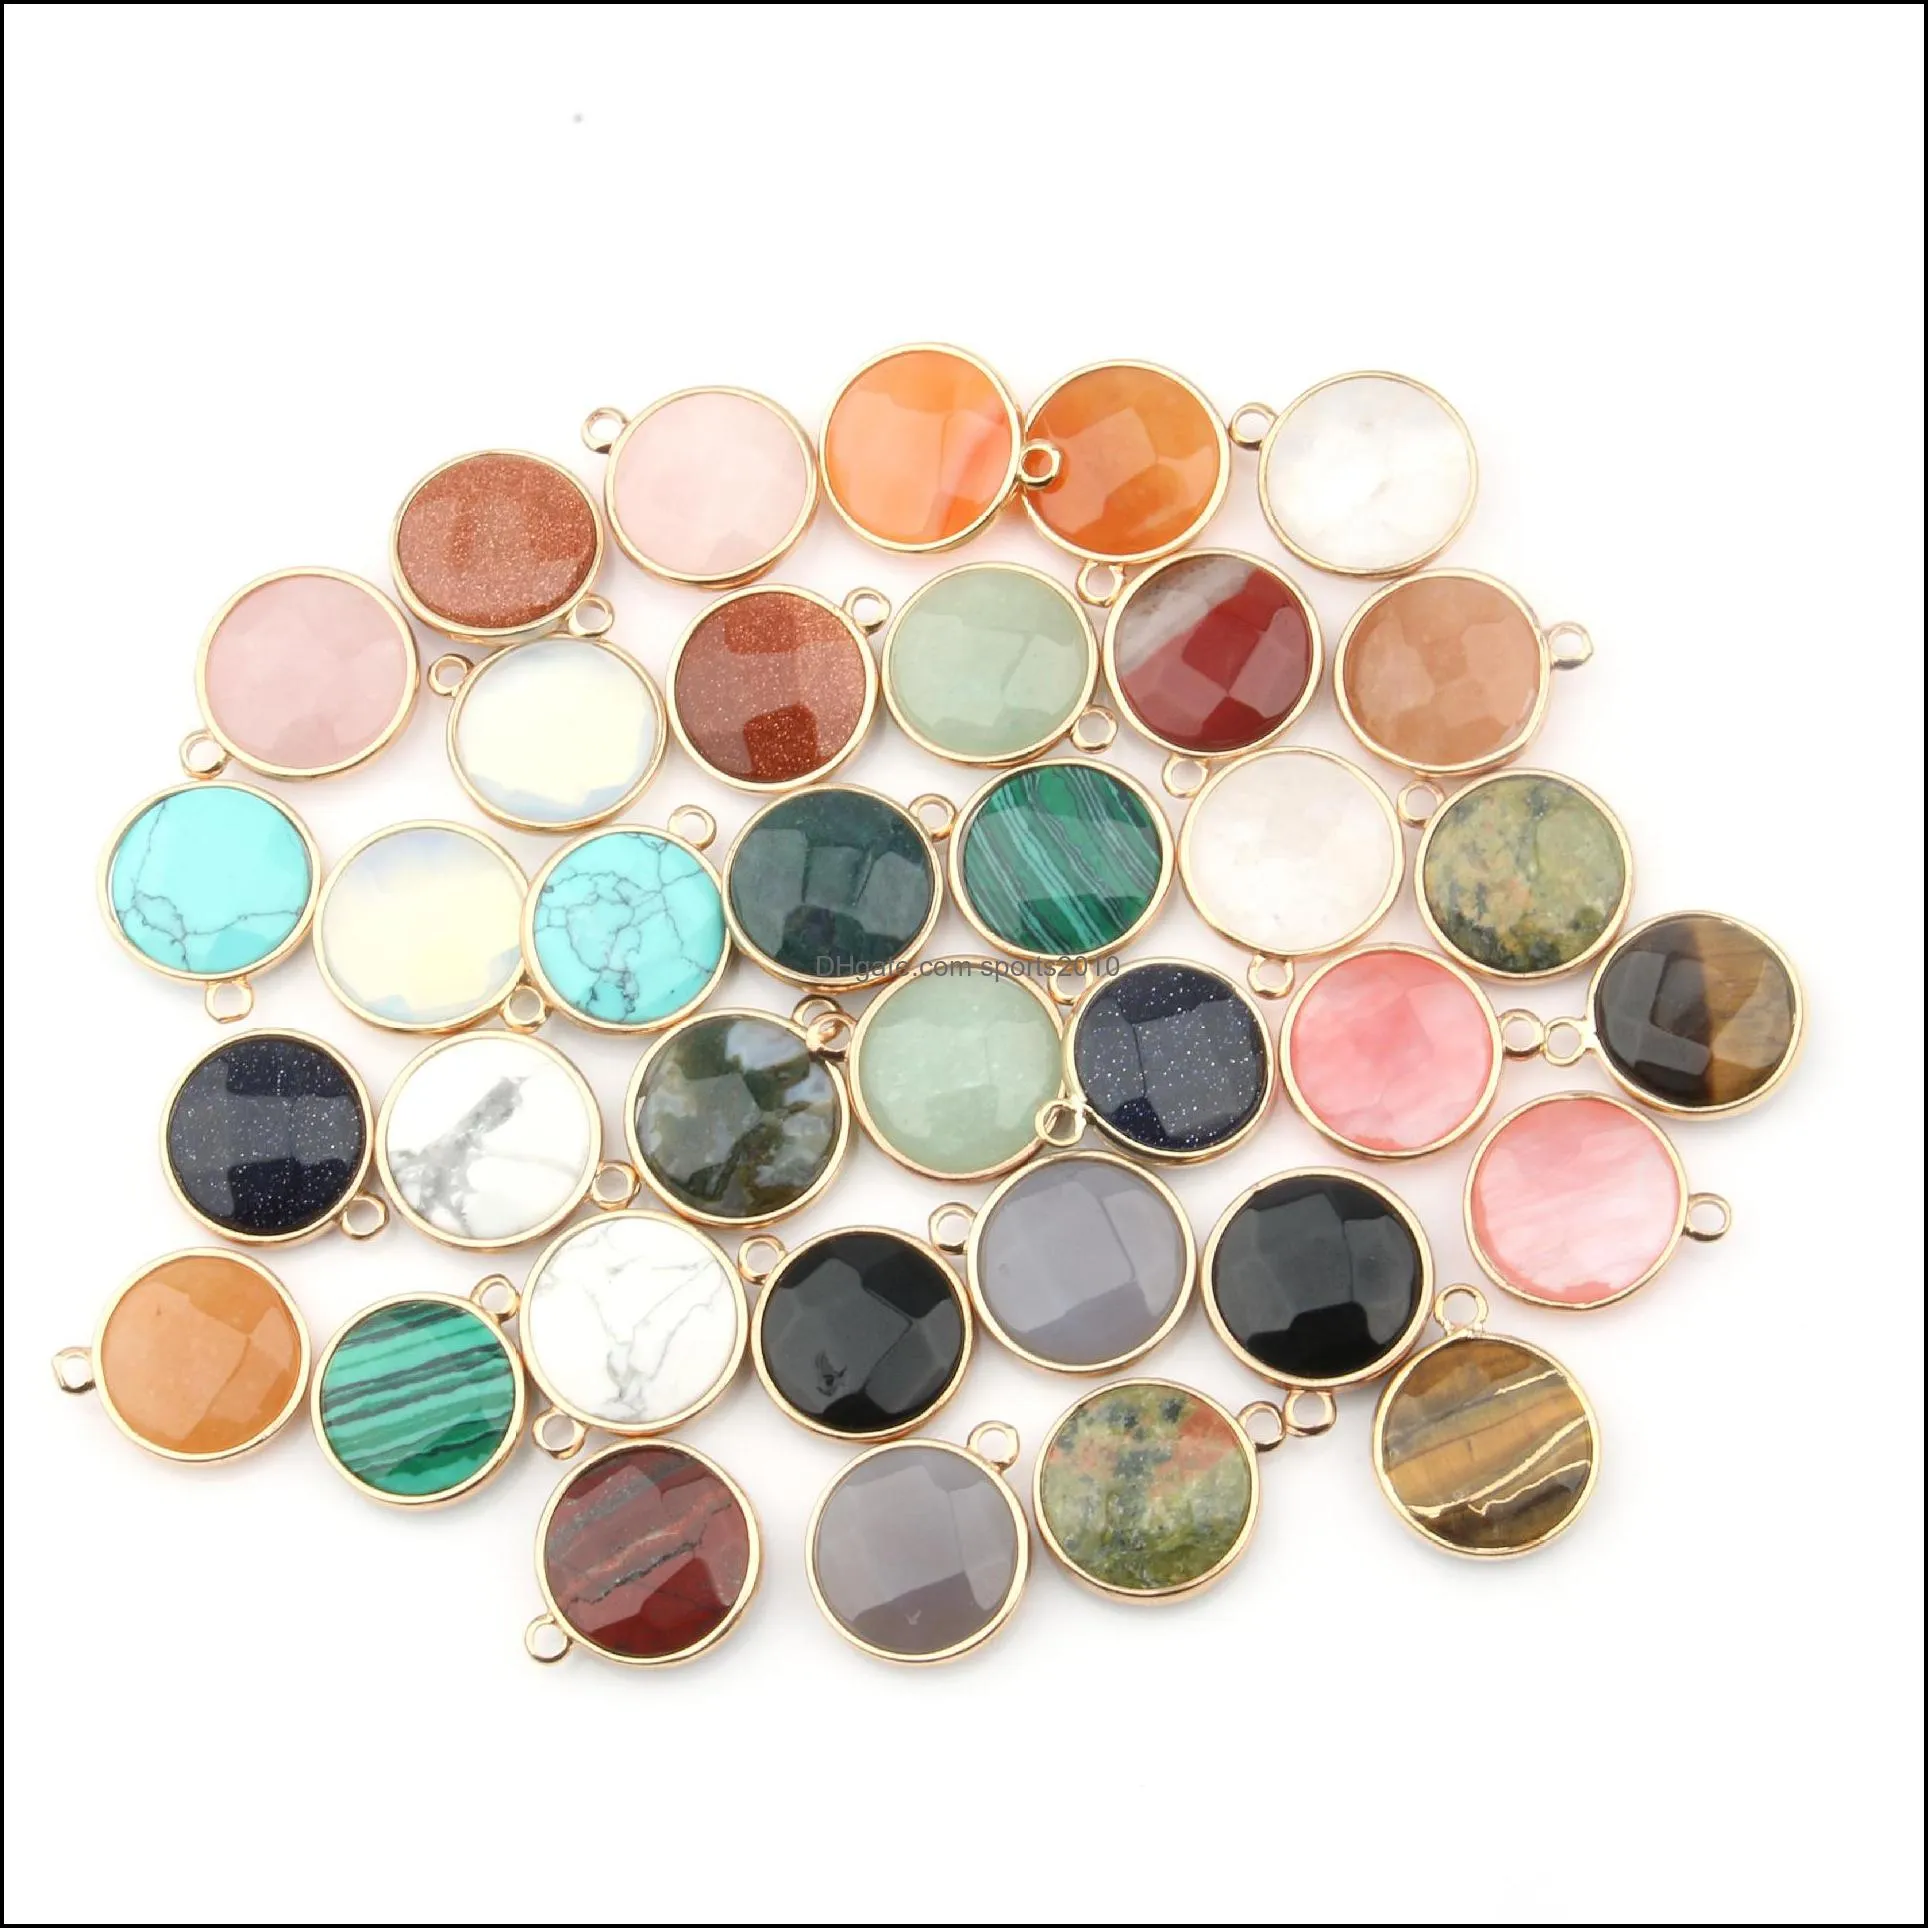 faceted round shape natural stone charms healing agates crystal turquoises jades opal stones pendant for jewelry making nec sports2010